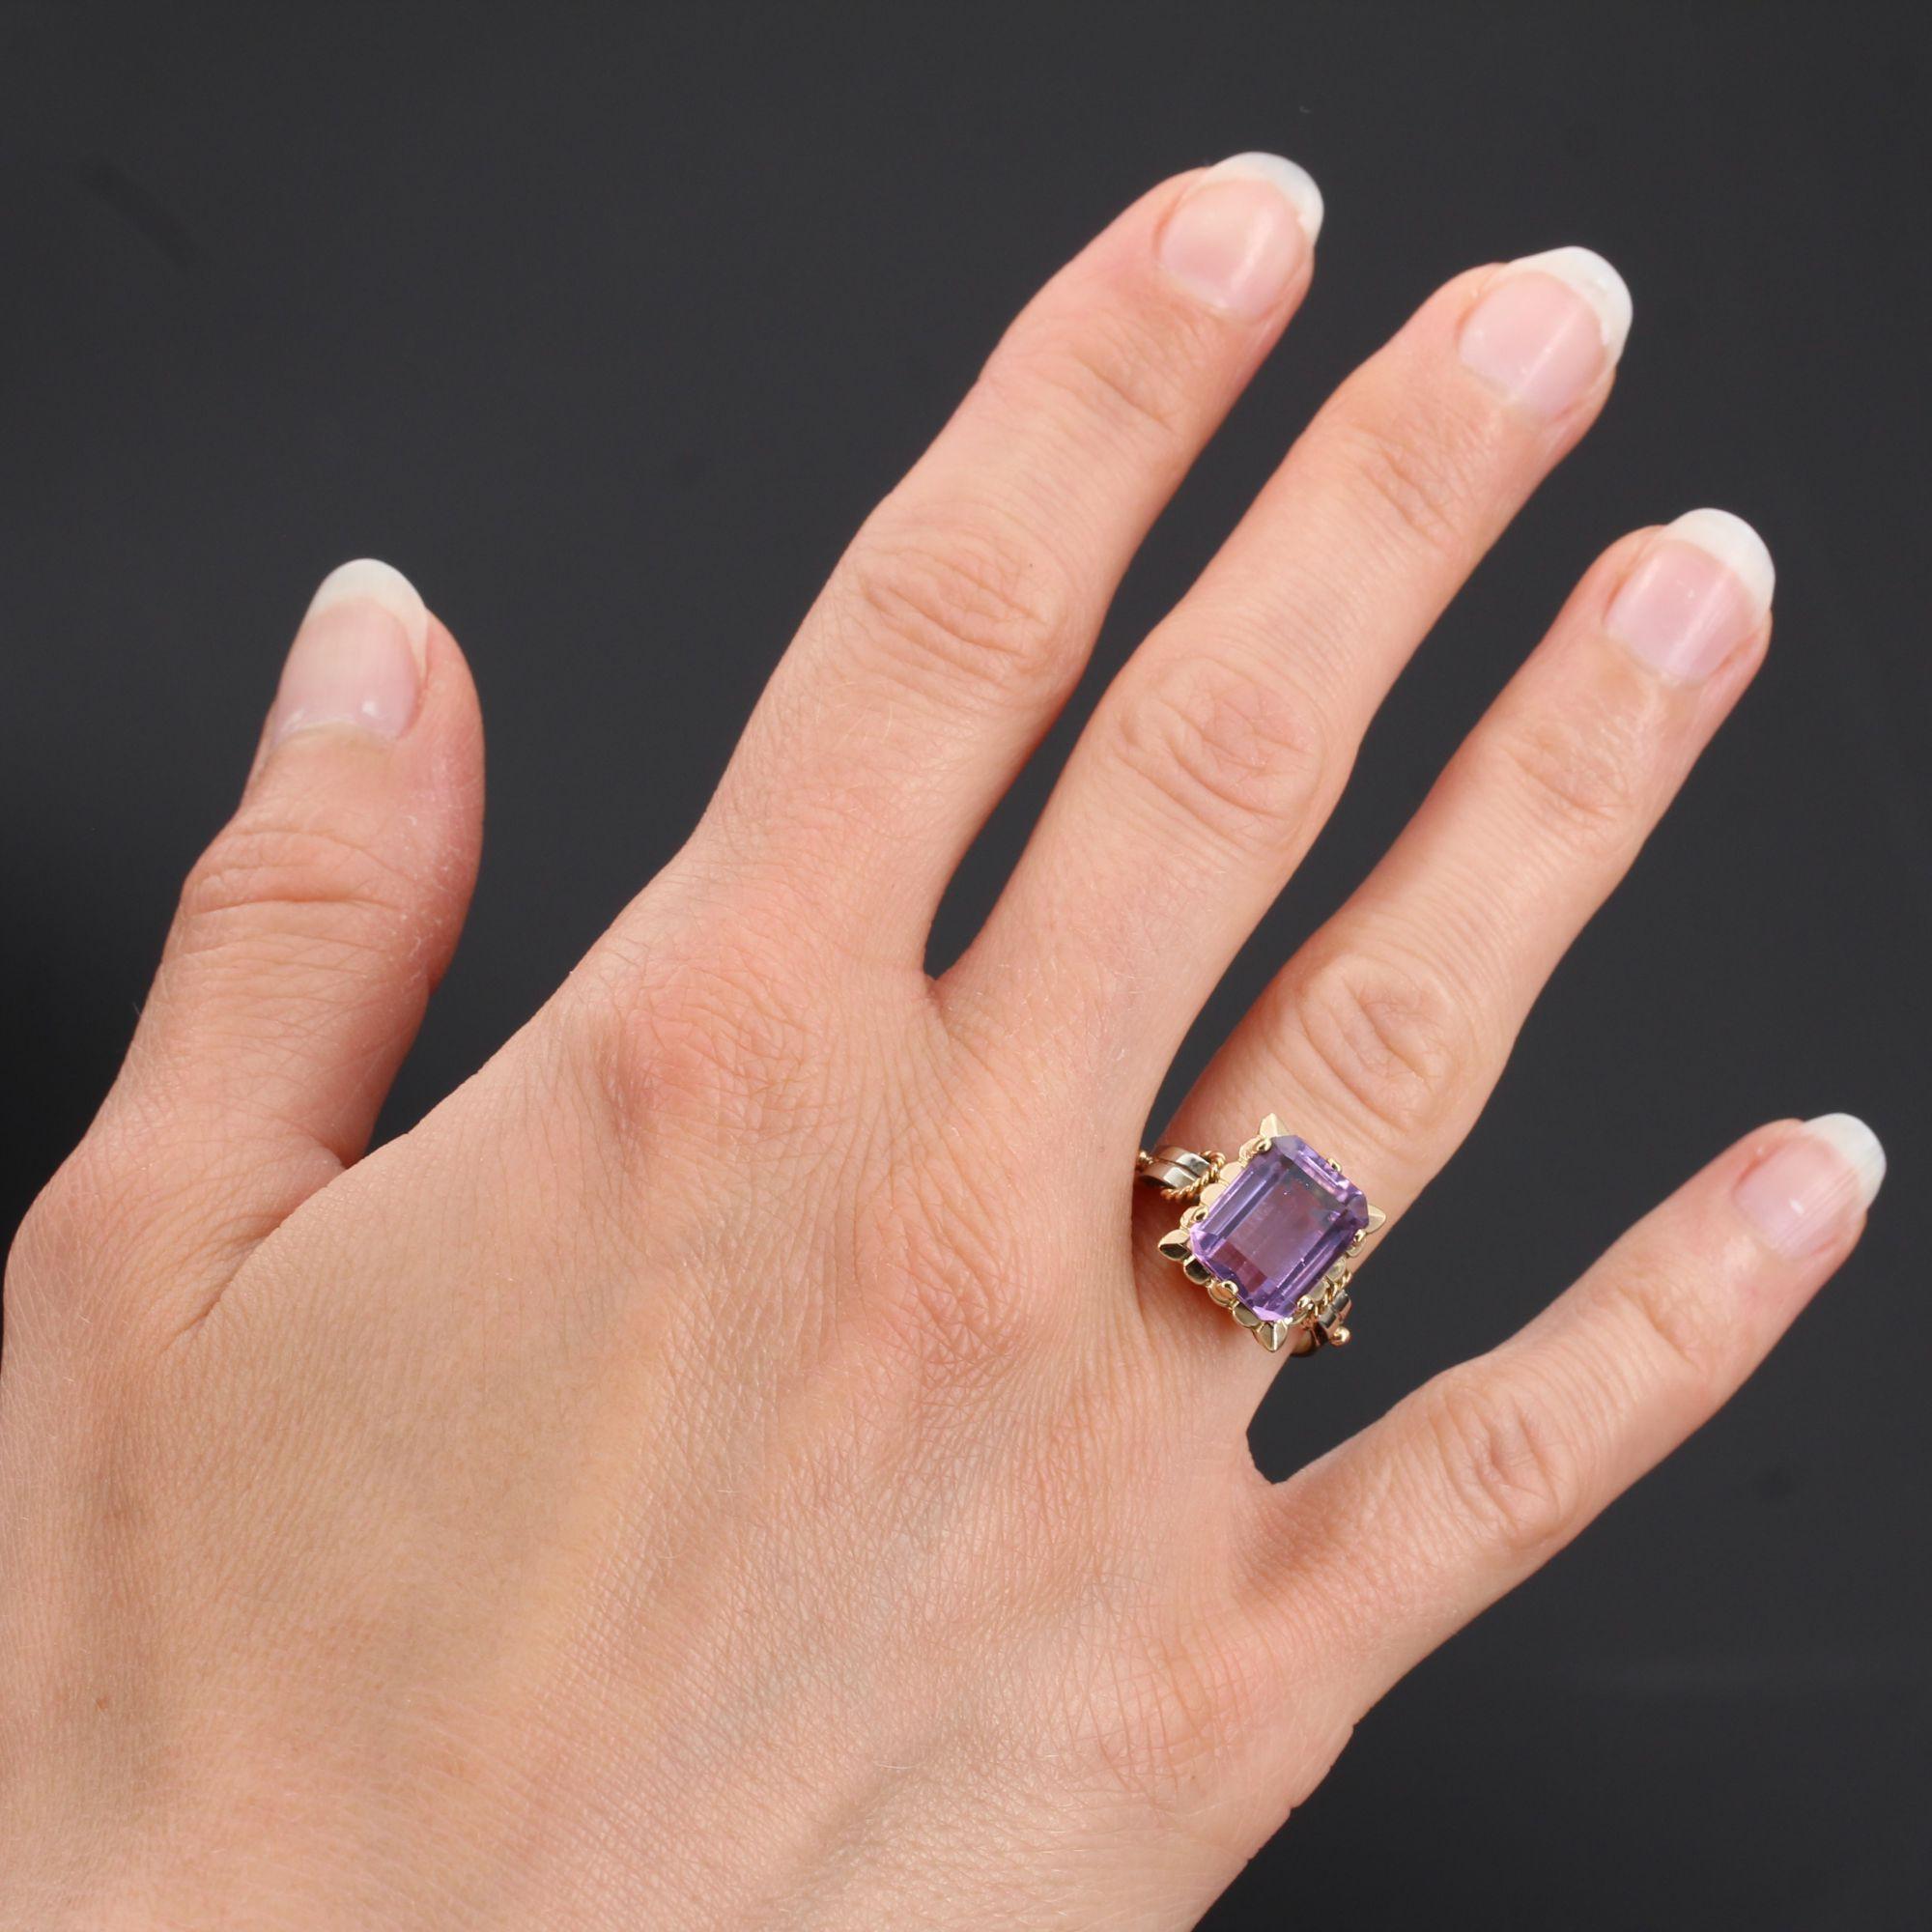 Ring in 18 karat rose gold and white gold.
Magnificent retro ring, it is set on its top of an degrees- cut amethyst. On both sides, the departure of the ring is formed by a gold cord and a white gold bridge which ends in a small yellow gold